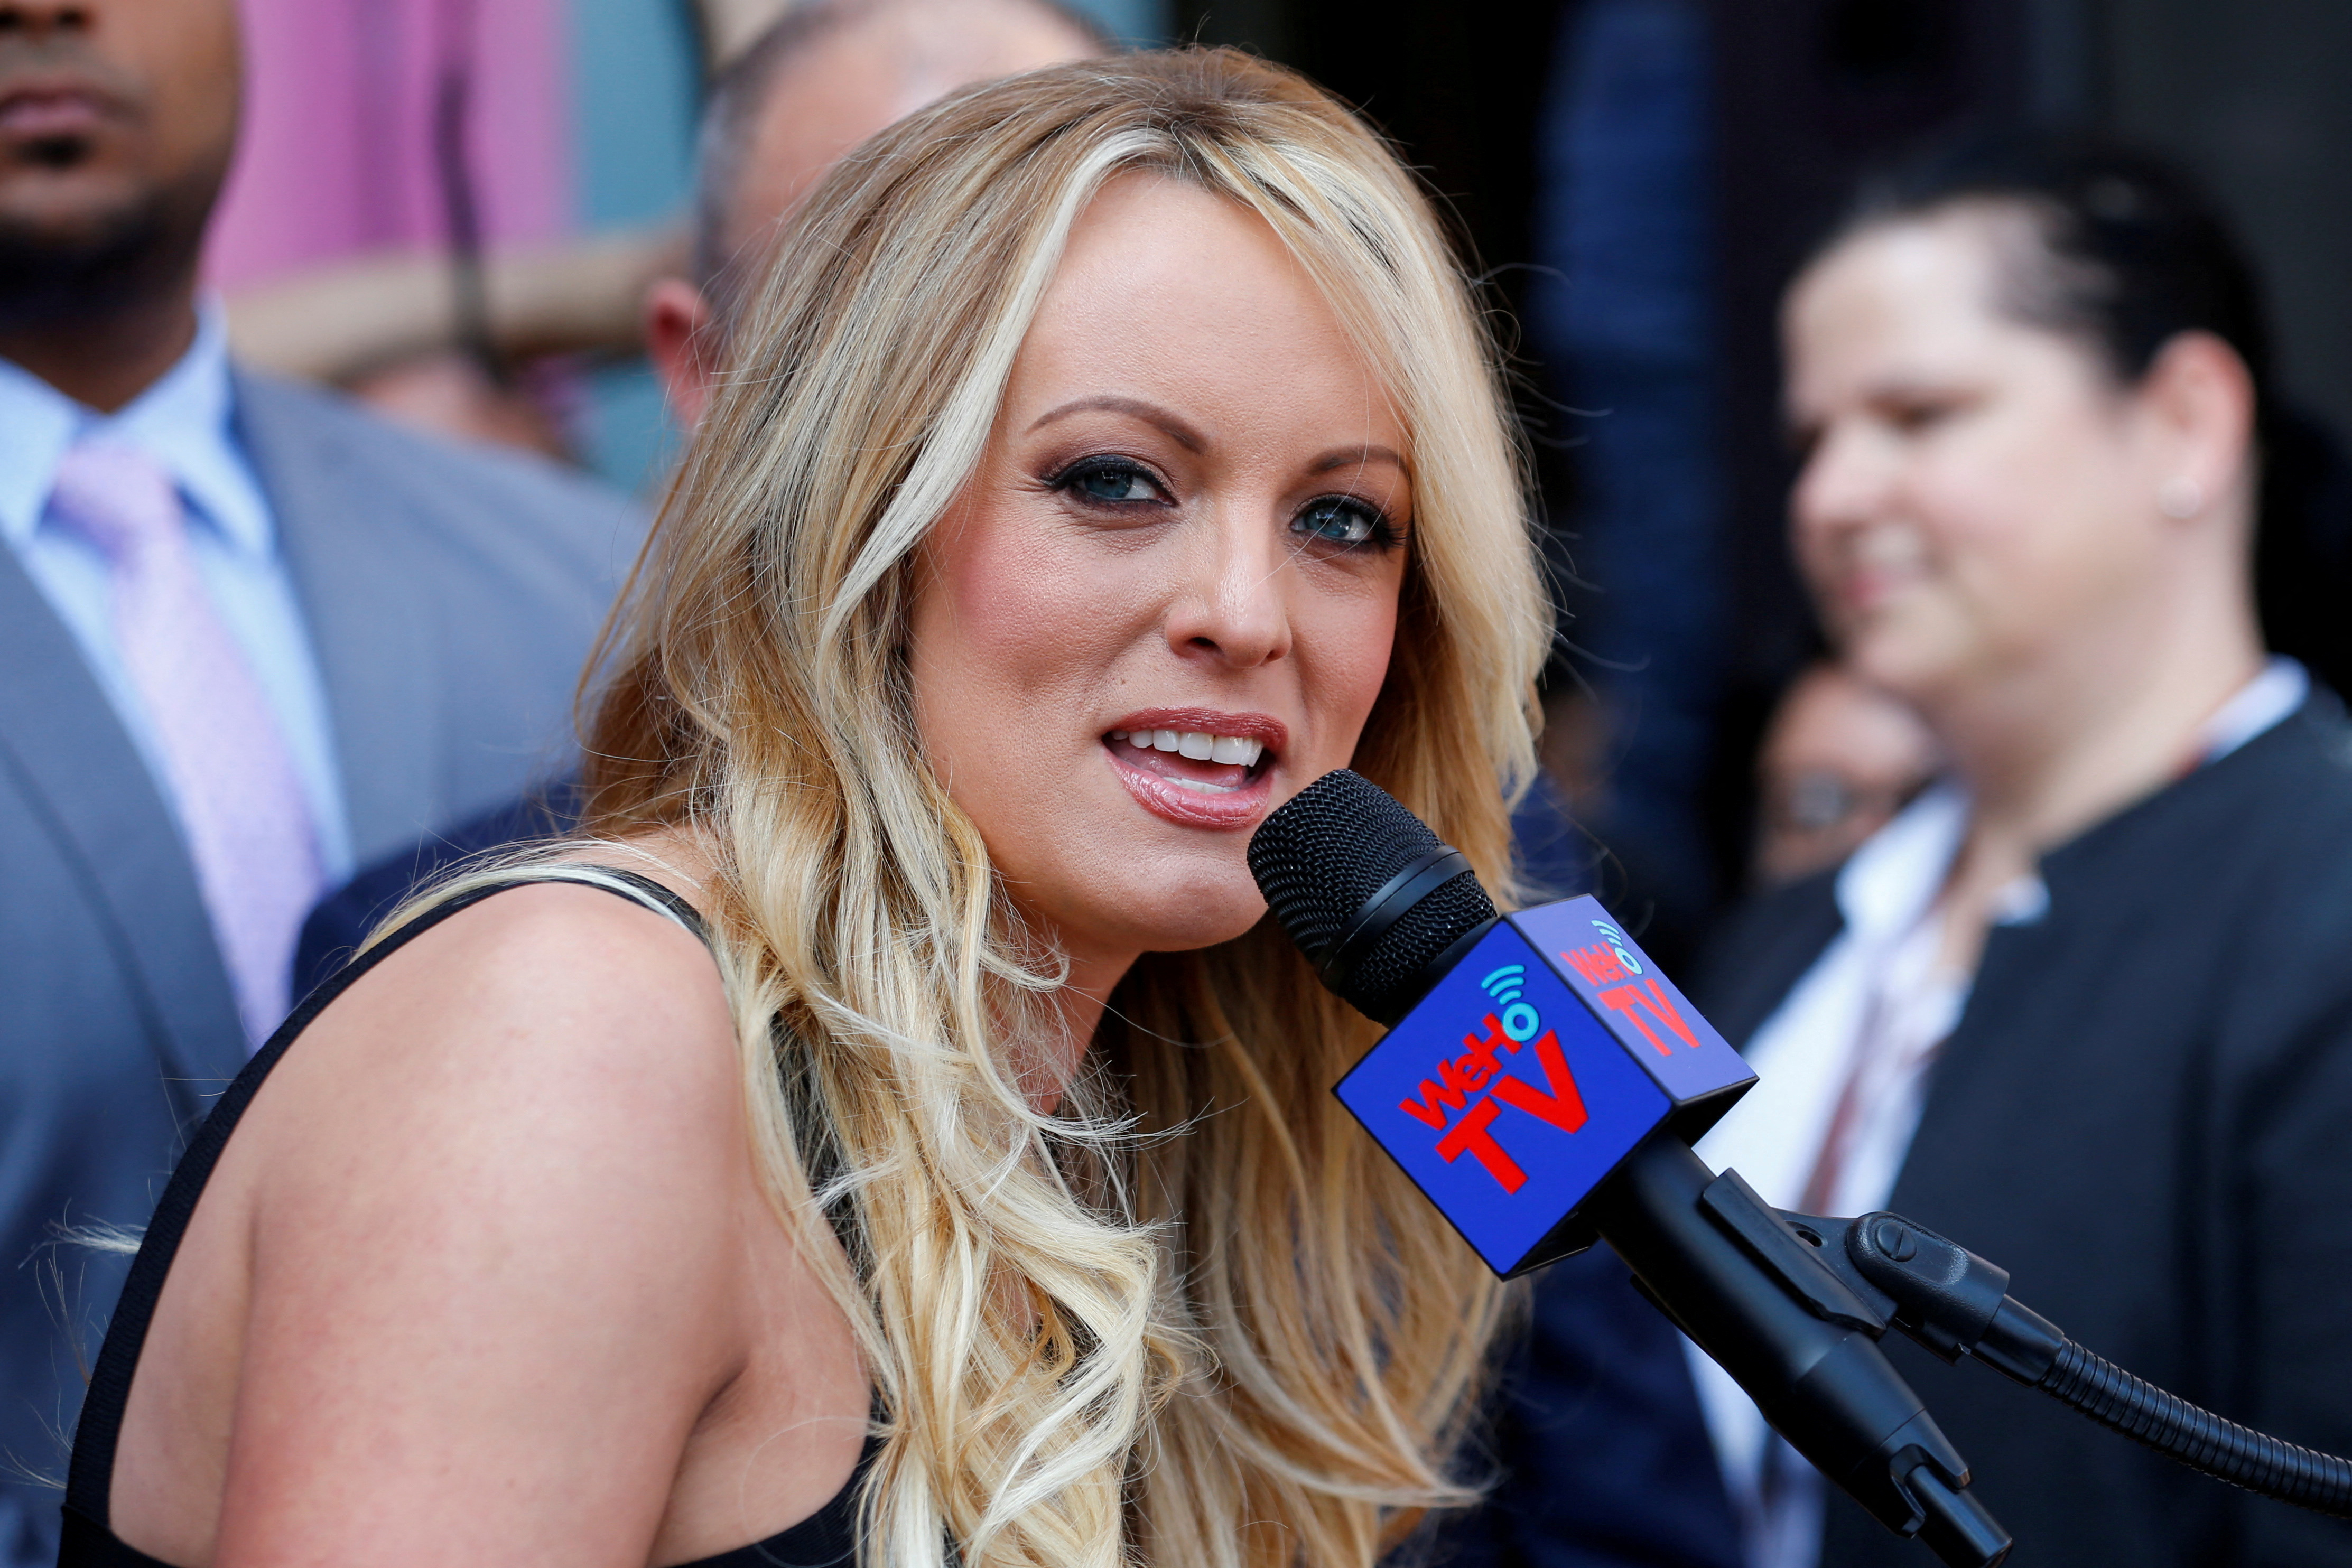 Who is Stormy Daniels and how is she involved in the Donald Trump indictment? Reuters image